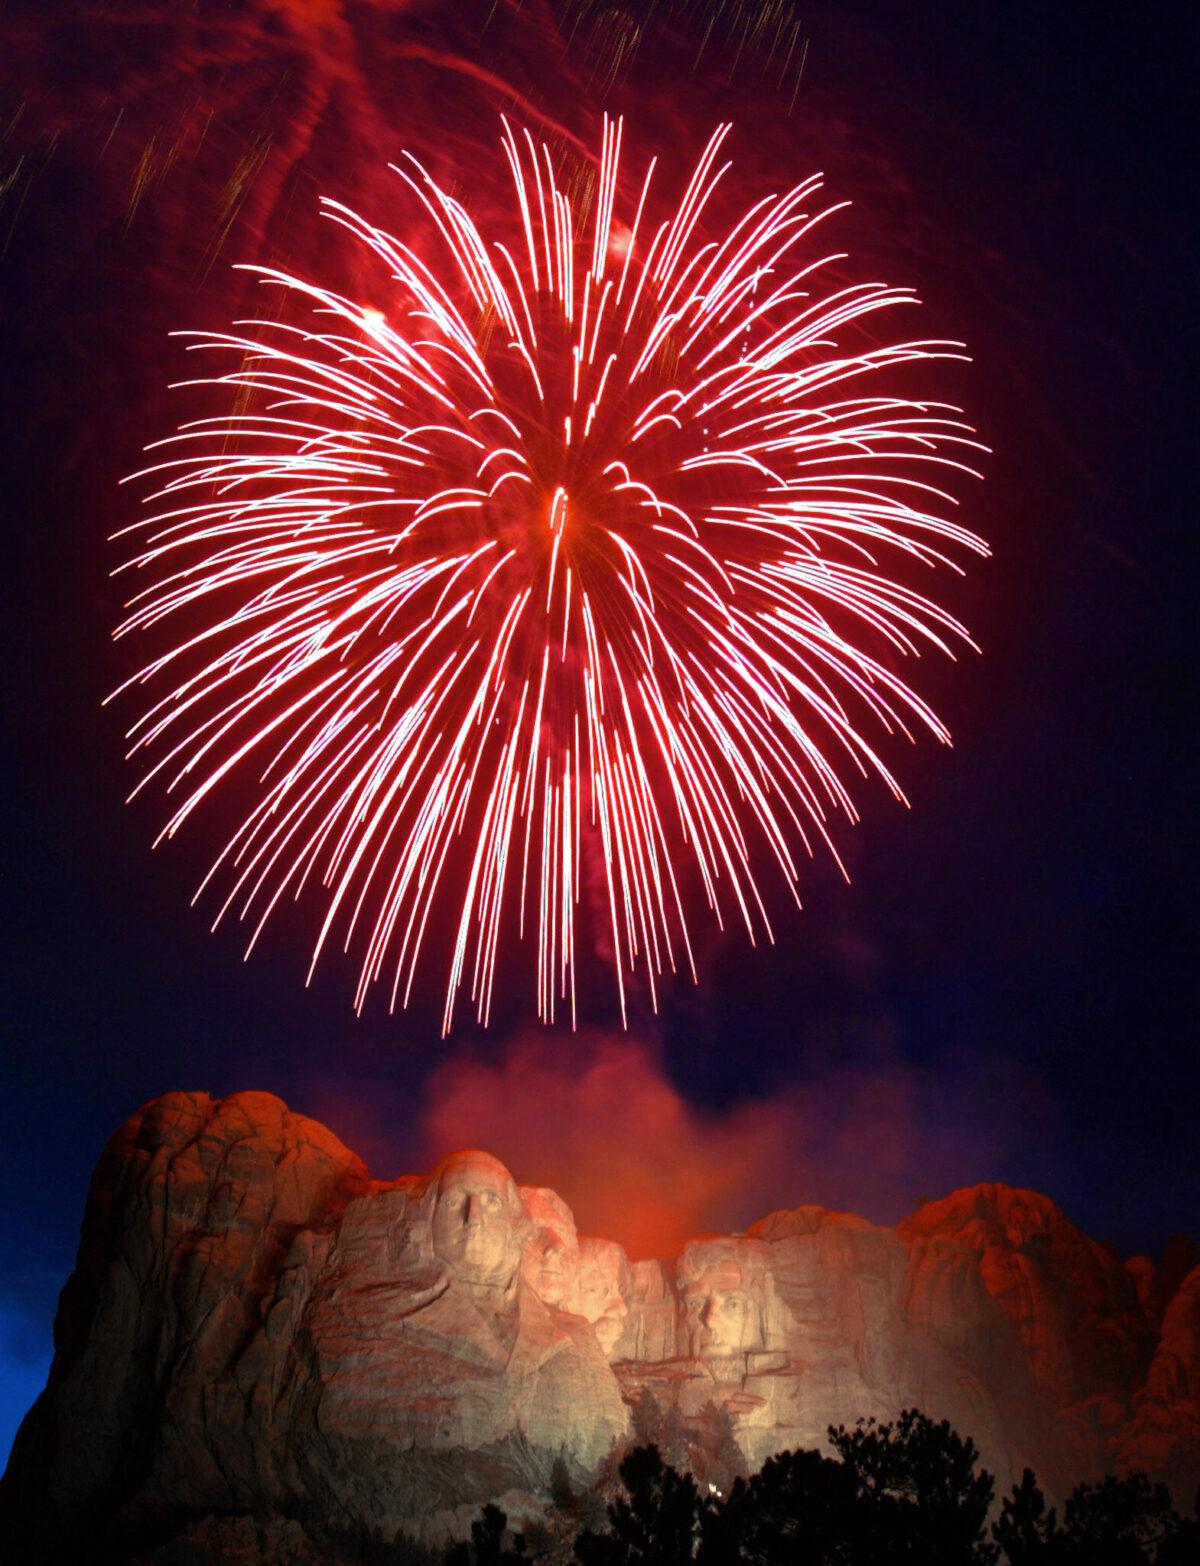 Fireworks over Mount Rushmore National Memorial in Keystone, South Dakota, in celebration of Independence Day in the United States on July 3, 2004. (Jeff Haynes/AFP via Getty Images)